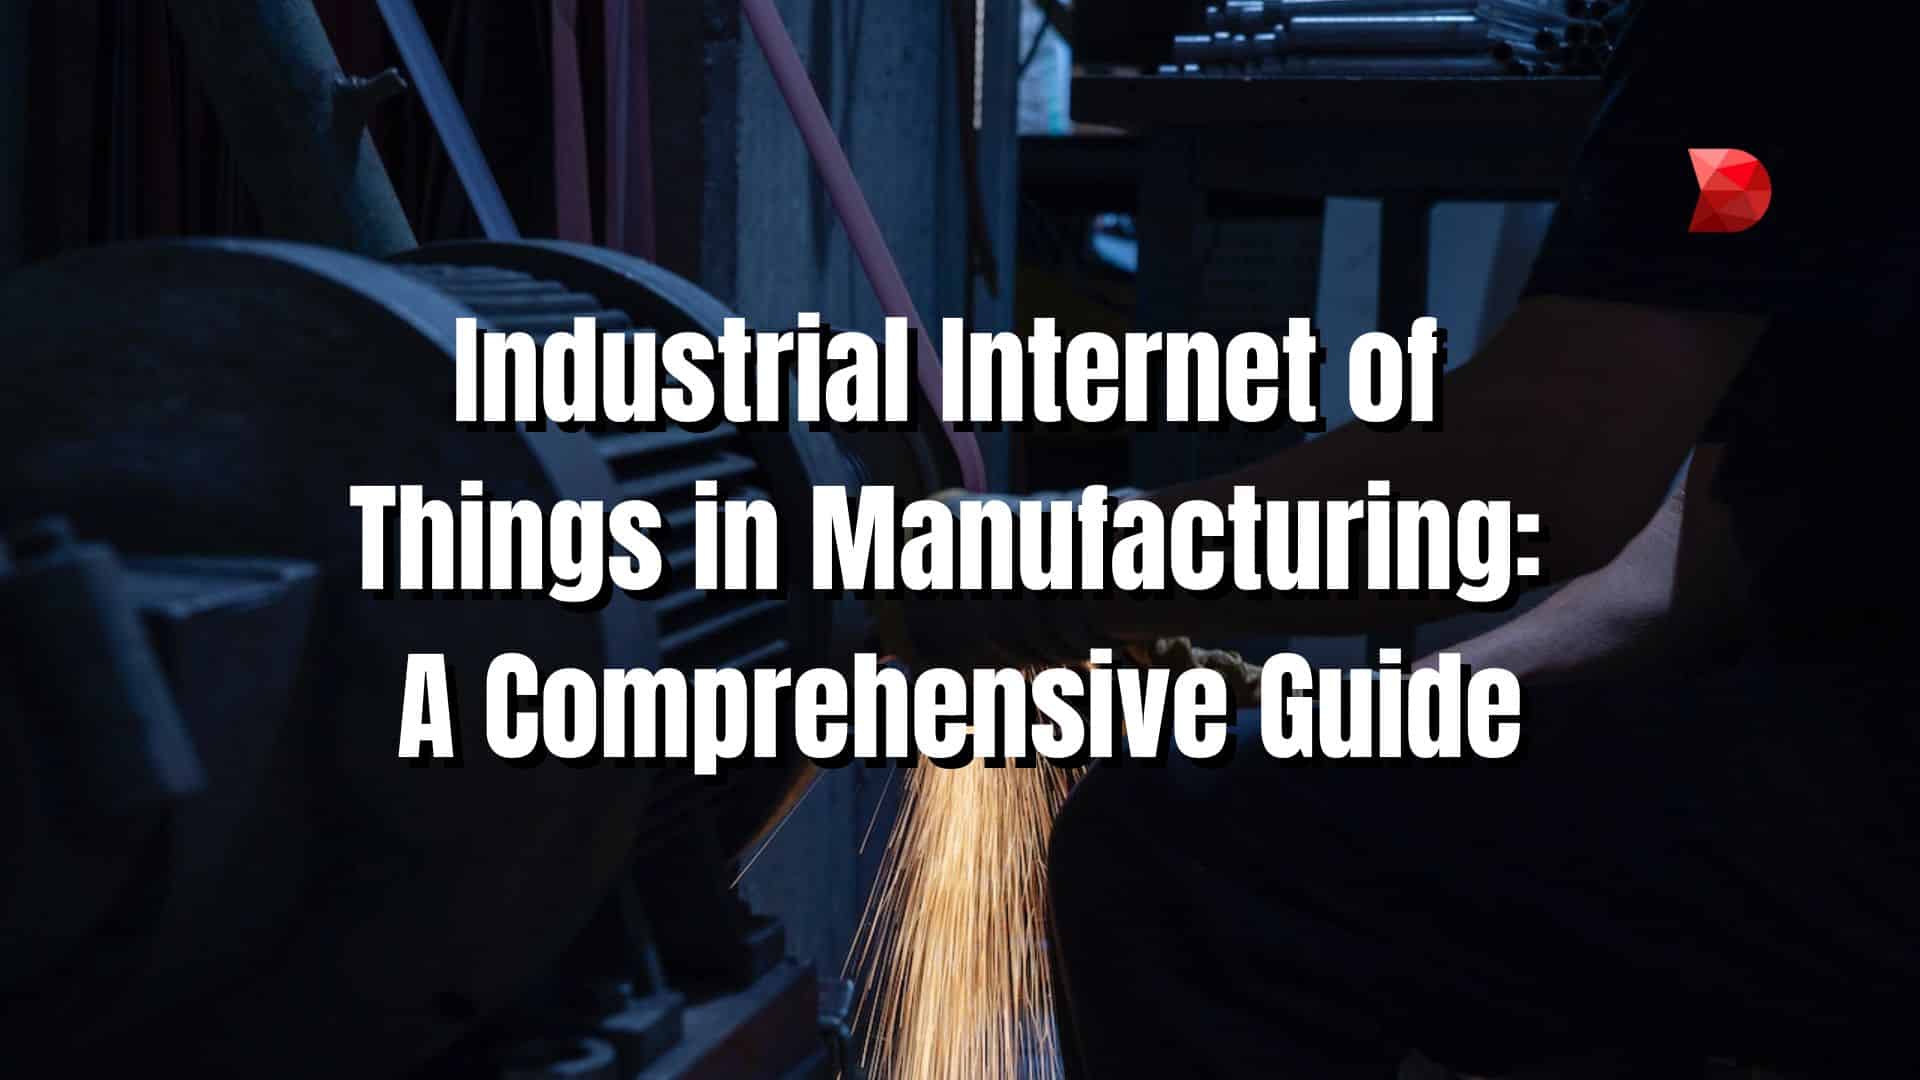 Industrial Internet of Things in Manufacturing A Comprehensive Guide